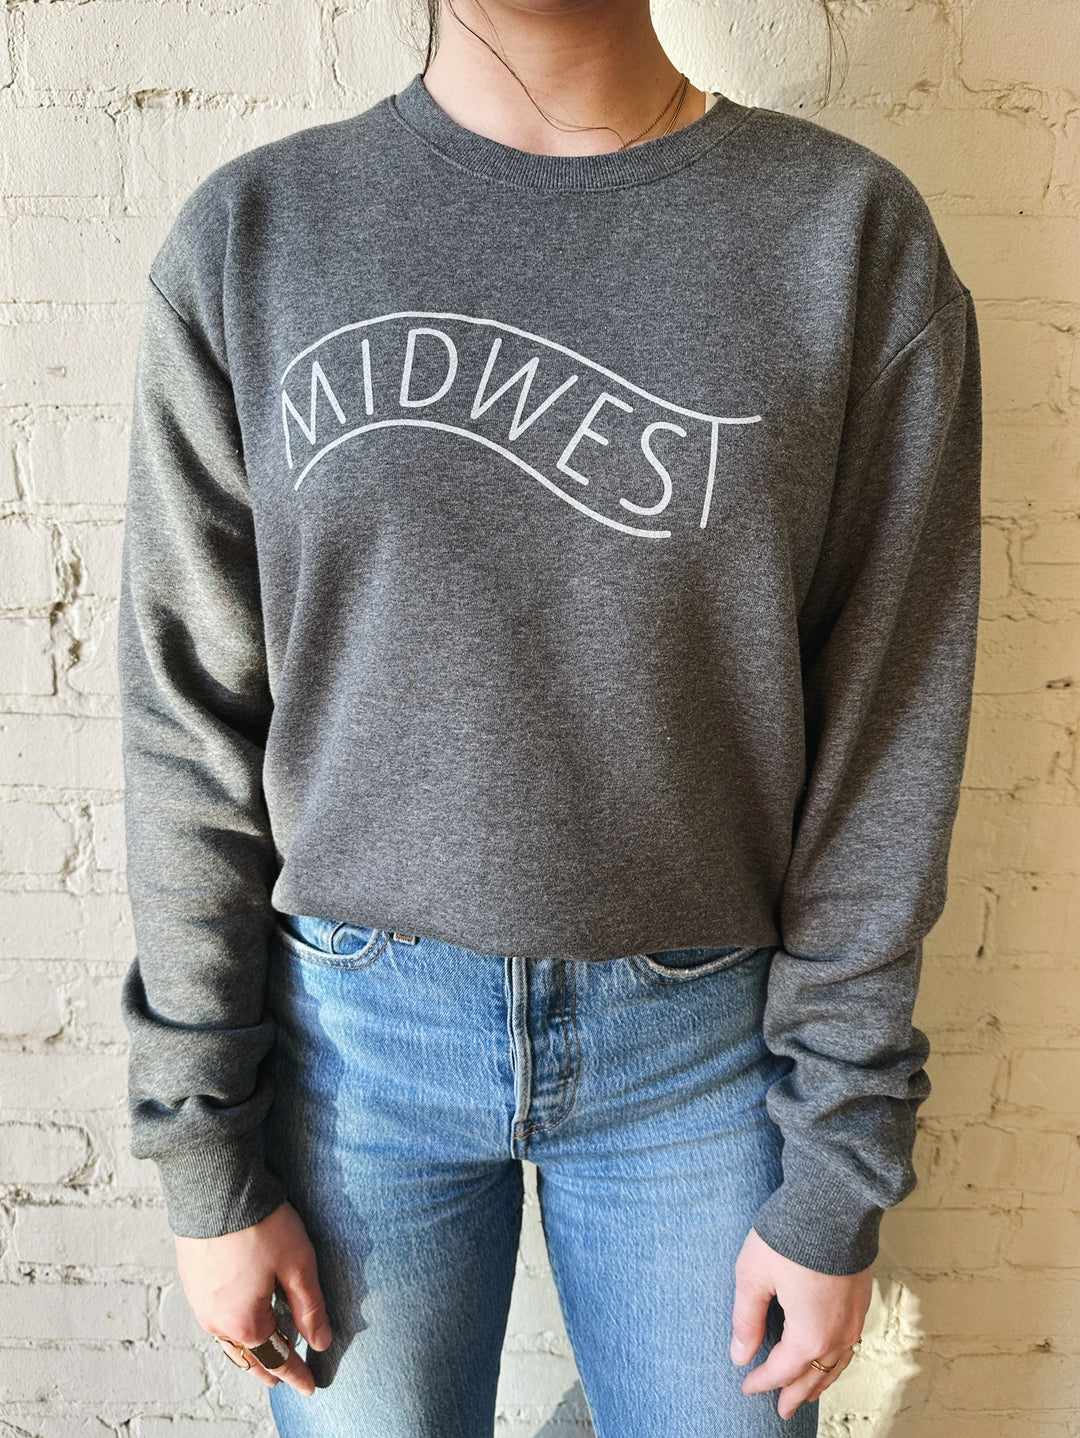 Brunette female model wearing jeans and a grey crewneck sweatshirt with Midwest silkscreened on it.